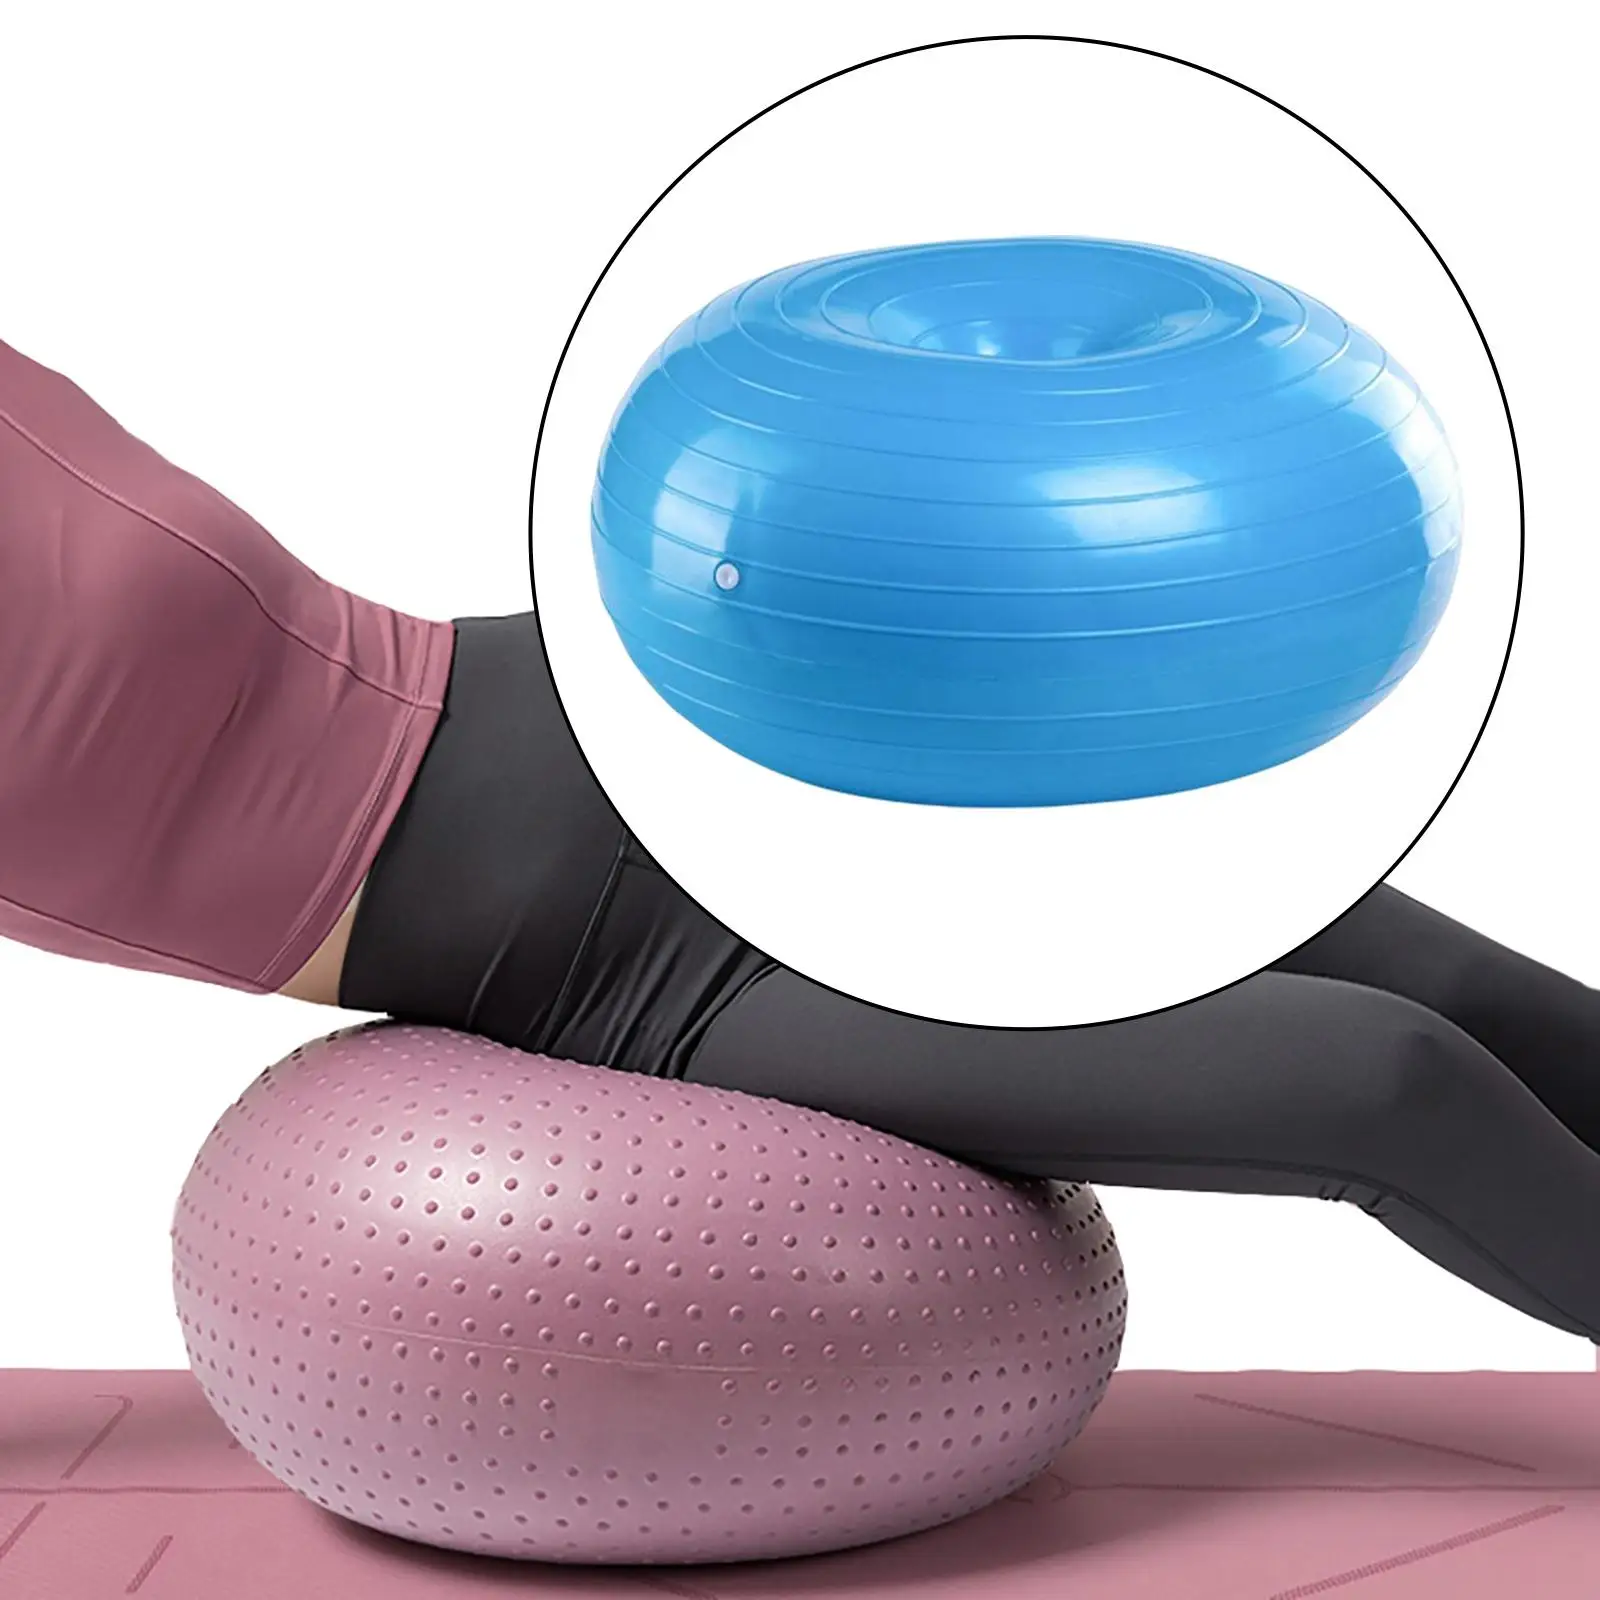 1 Piece Pilates Donut Balance Support Sport Fitness Ball Yoga Ball for Workout Gymnastic